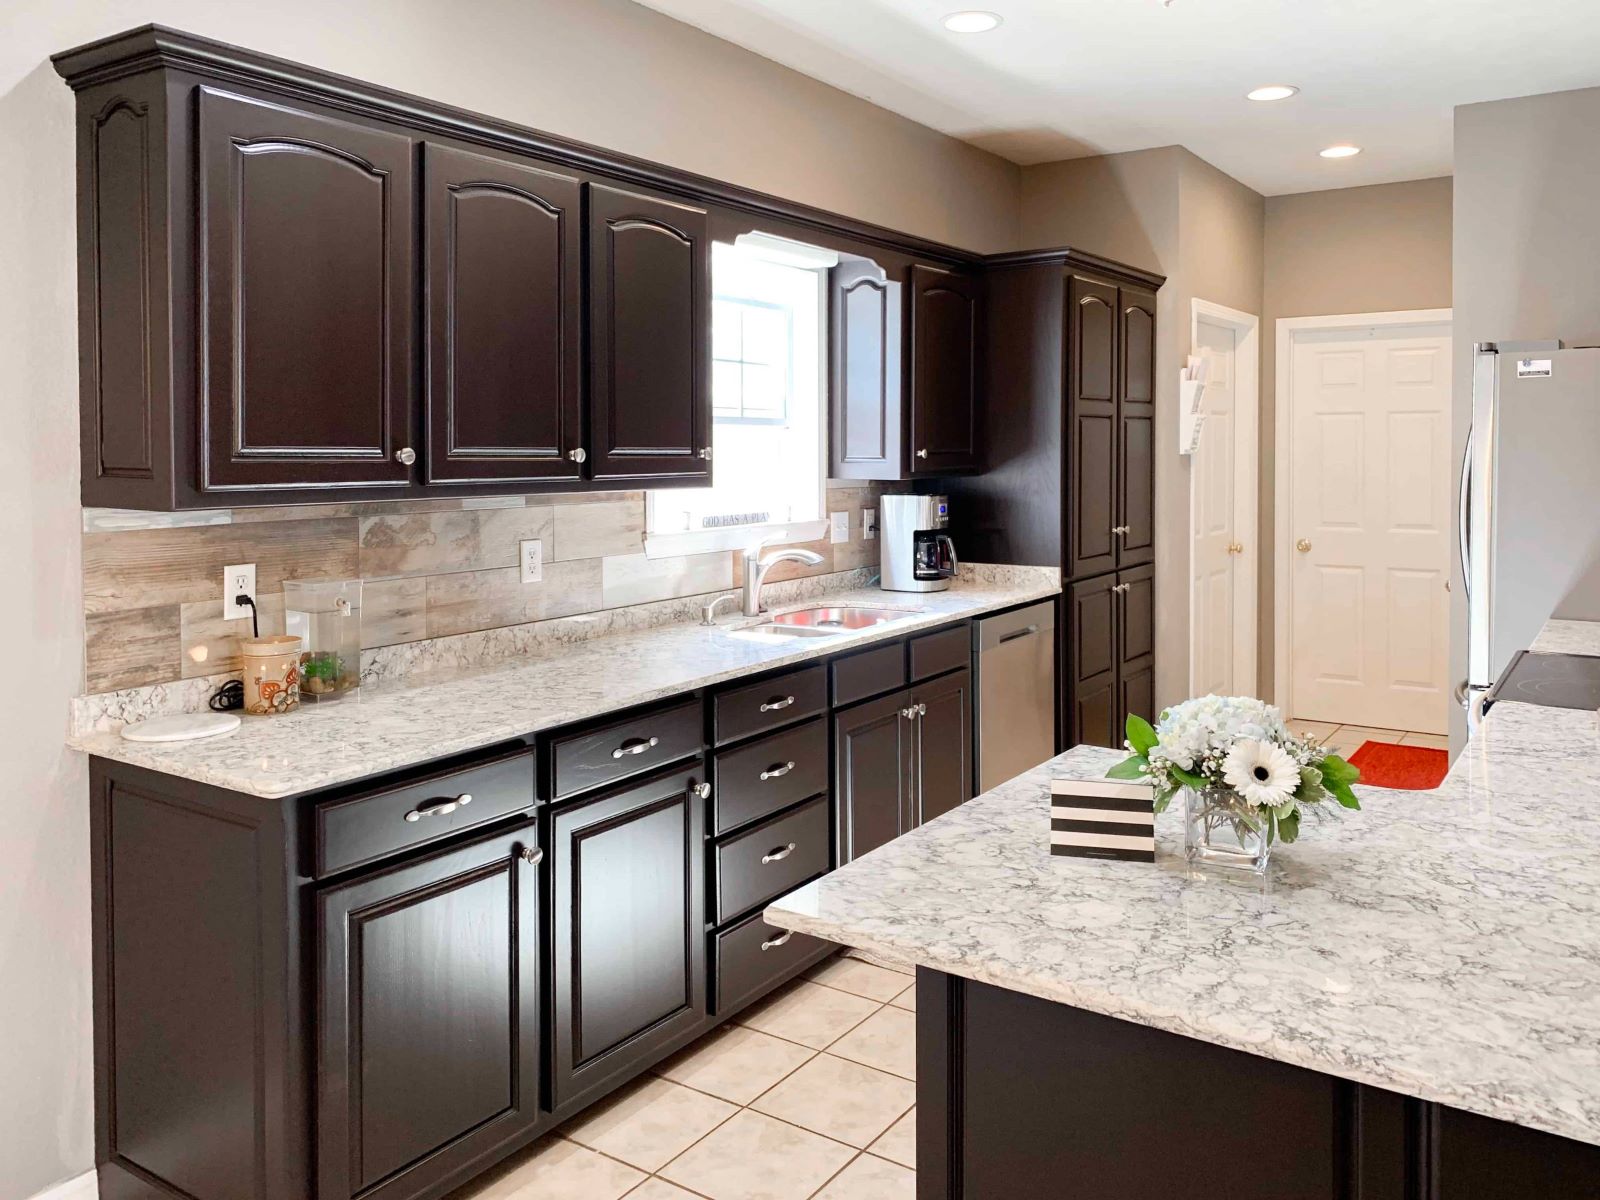 What Color Countertops Go With Brown Cabinets